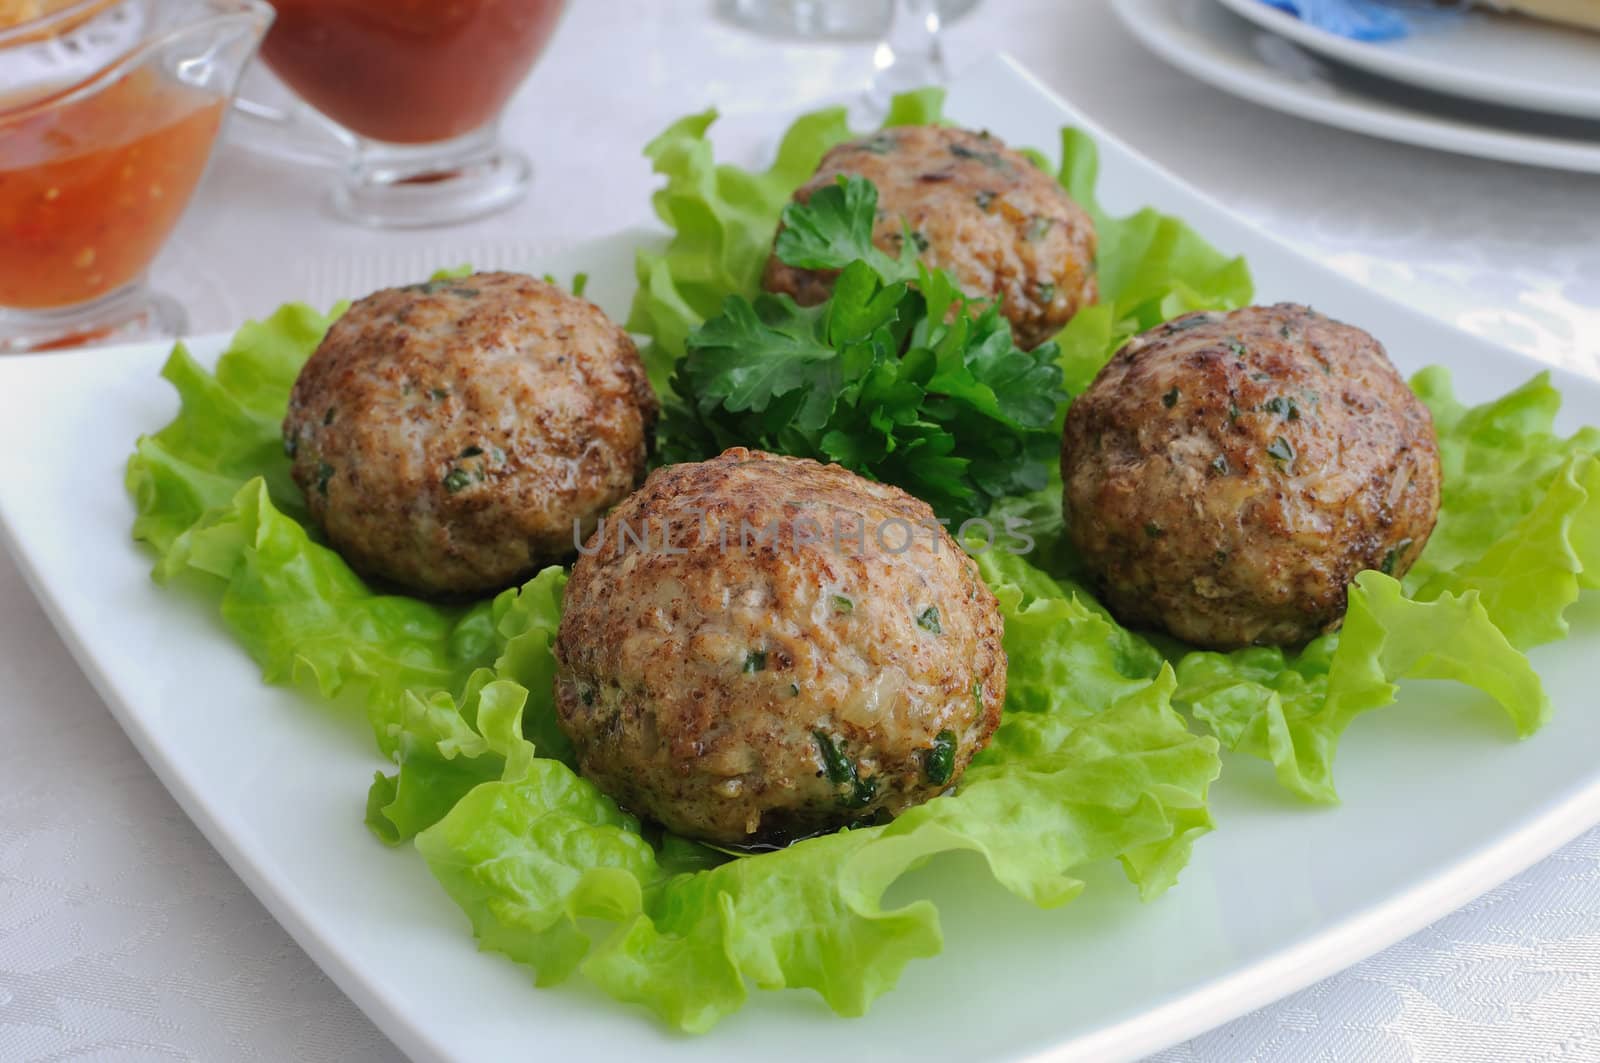 Meatballs with herbs by Apolonia